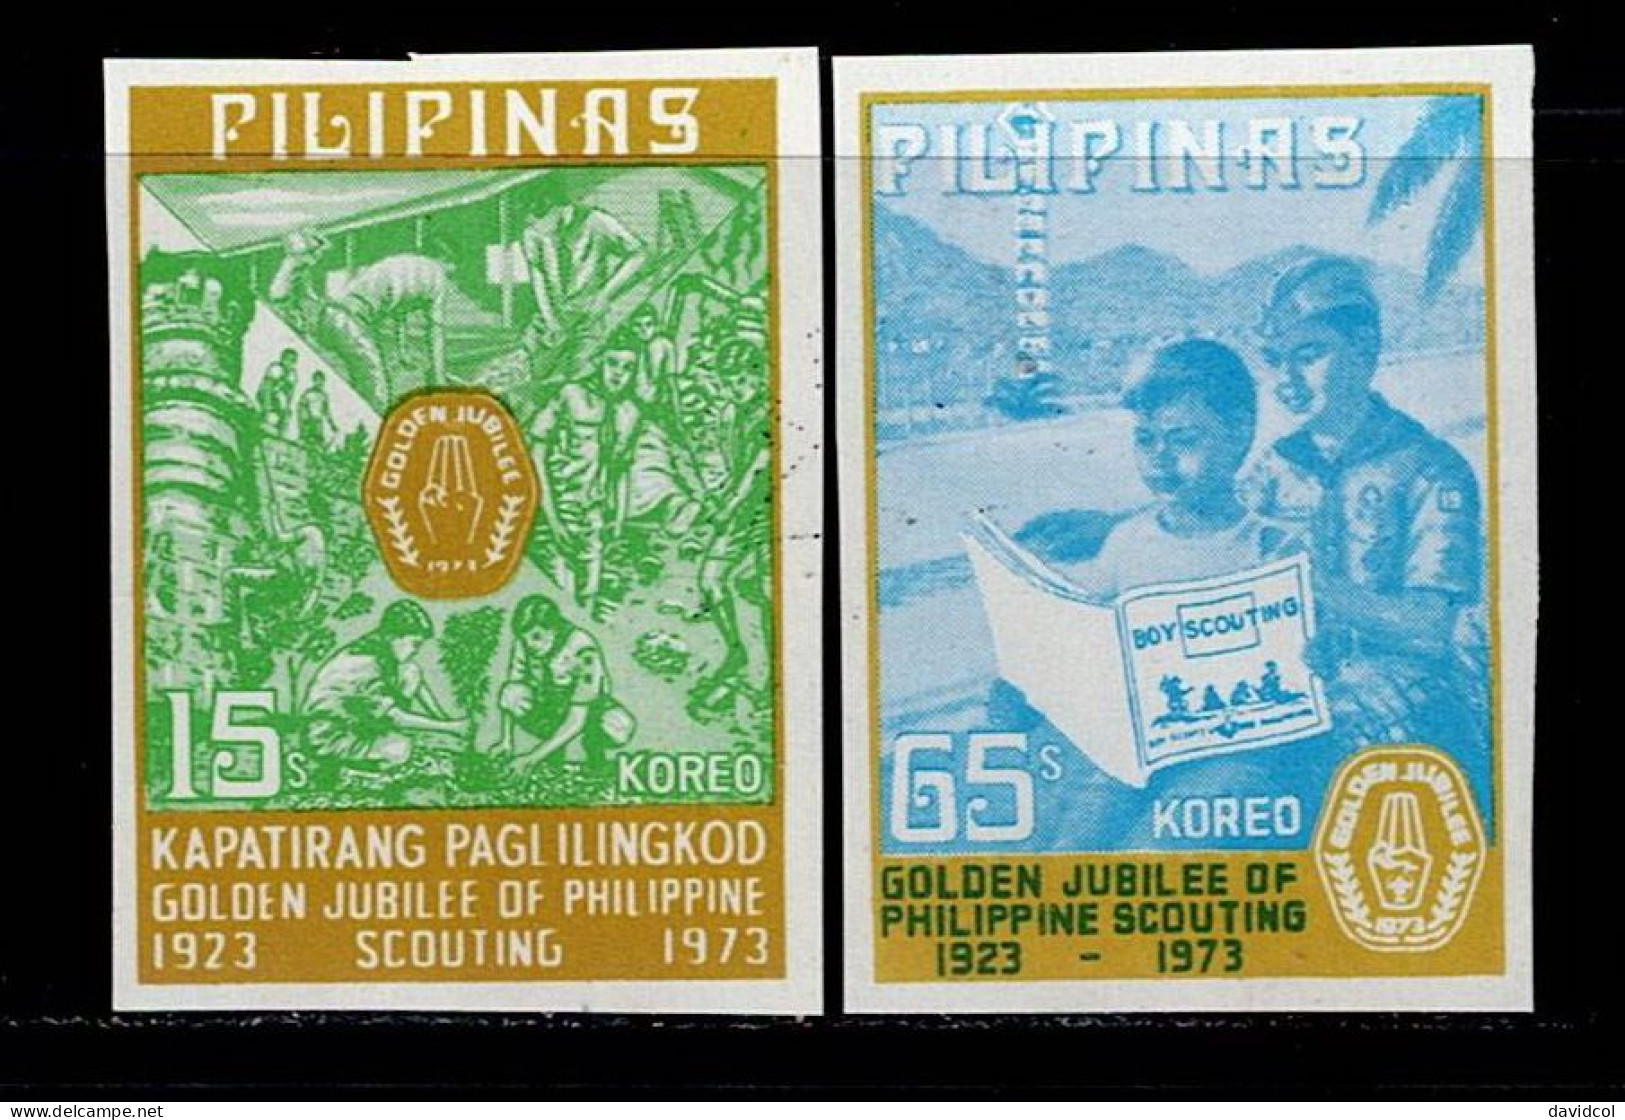 FIL-05- PHILIPPINES - 1973 - MNH -SCOUTS- IMPERFORATE- GOLDEN JUBILEE OF PHILIPPINE SCOUTING - Philippinen